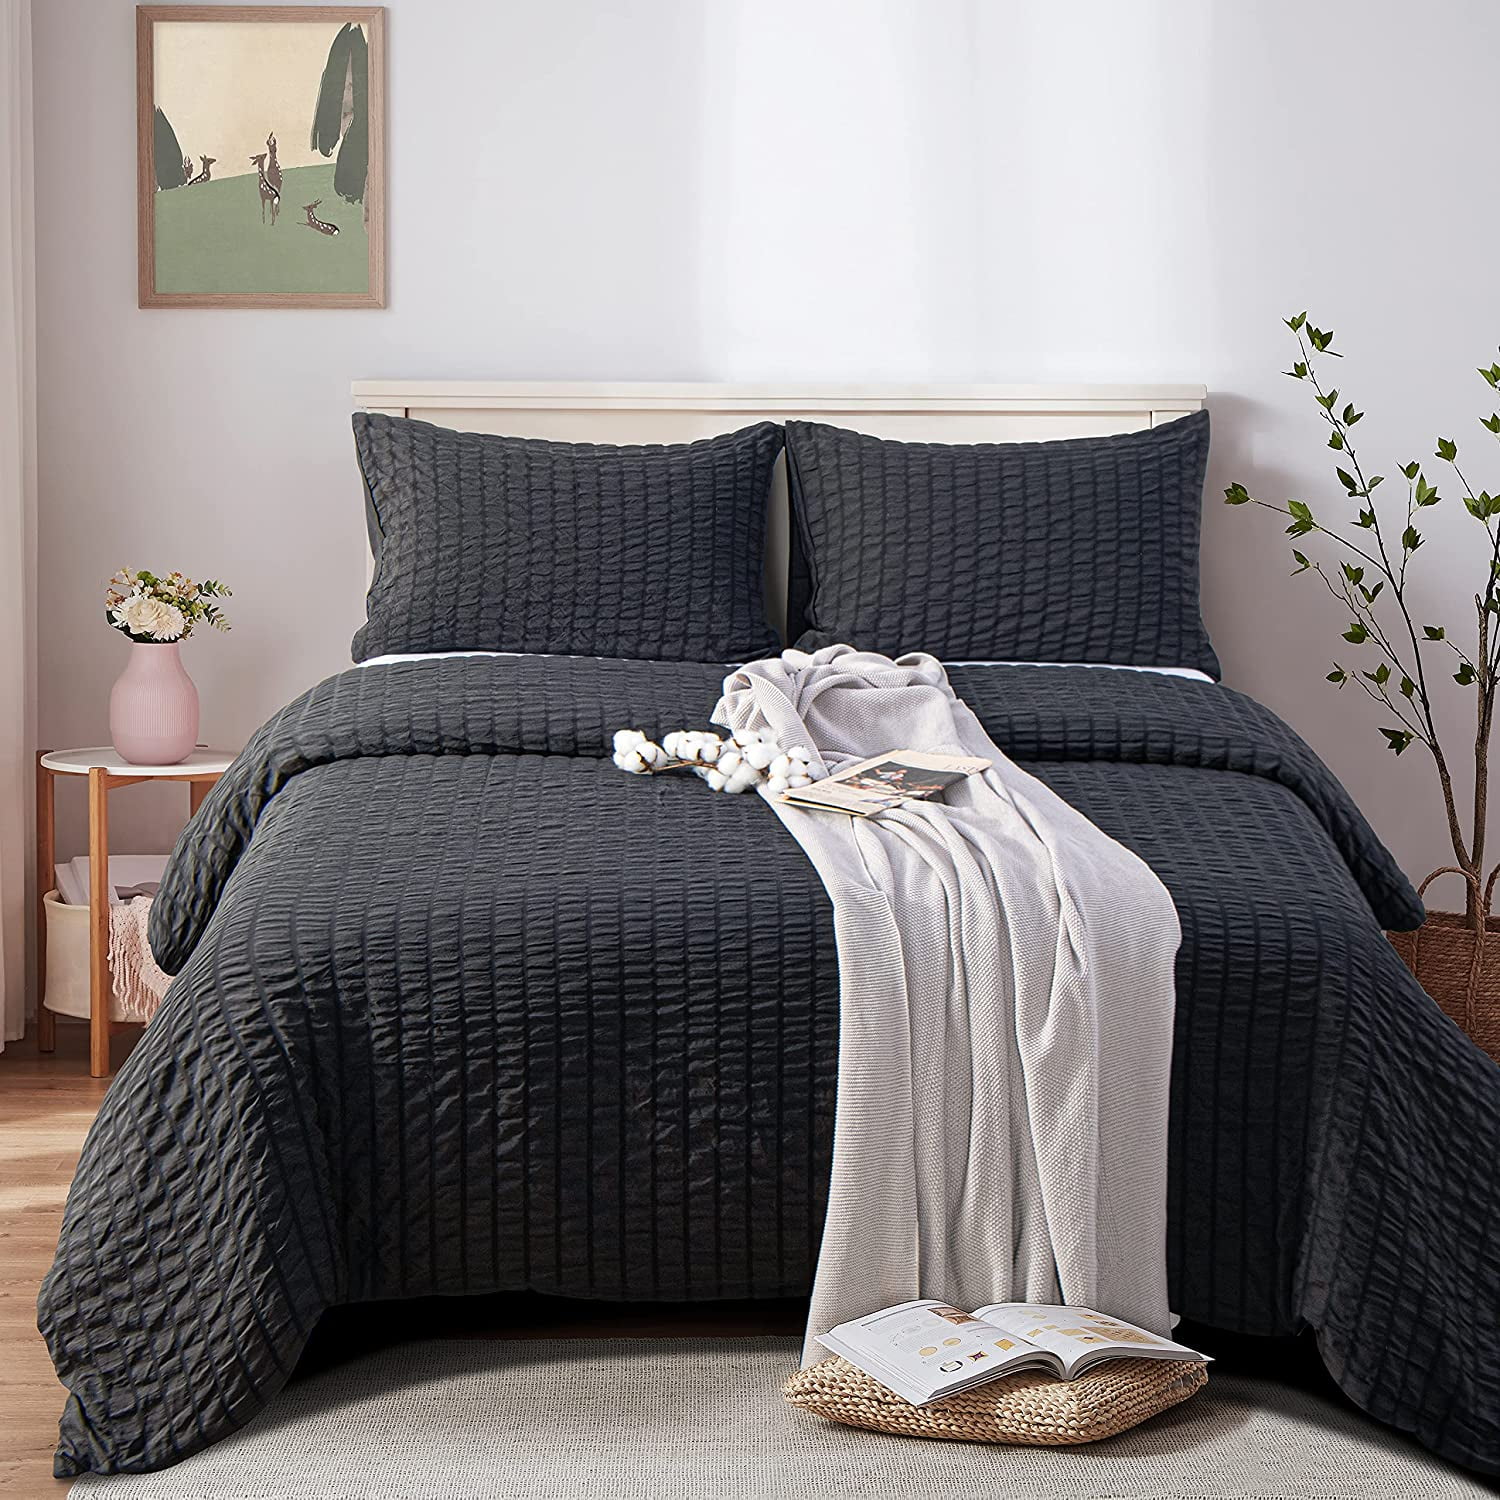 104 x 90 Inches Navy Blue Seersucker Textured Stripe Washed Microfiber Comforter Cover with Zipper Closure NTBAY 3 Pieces King Duvet Cover Set